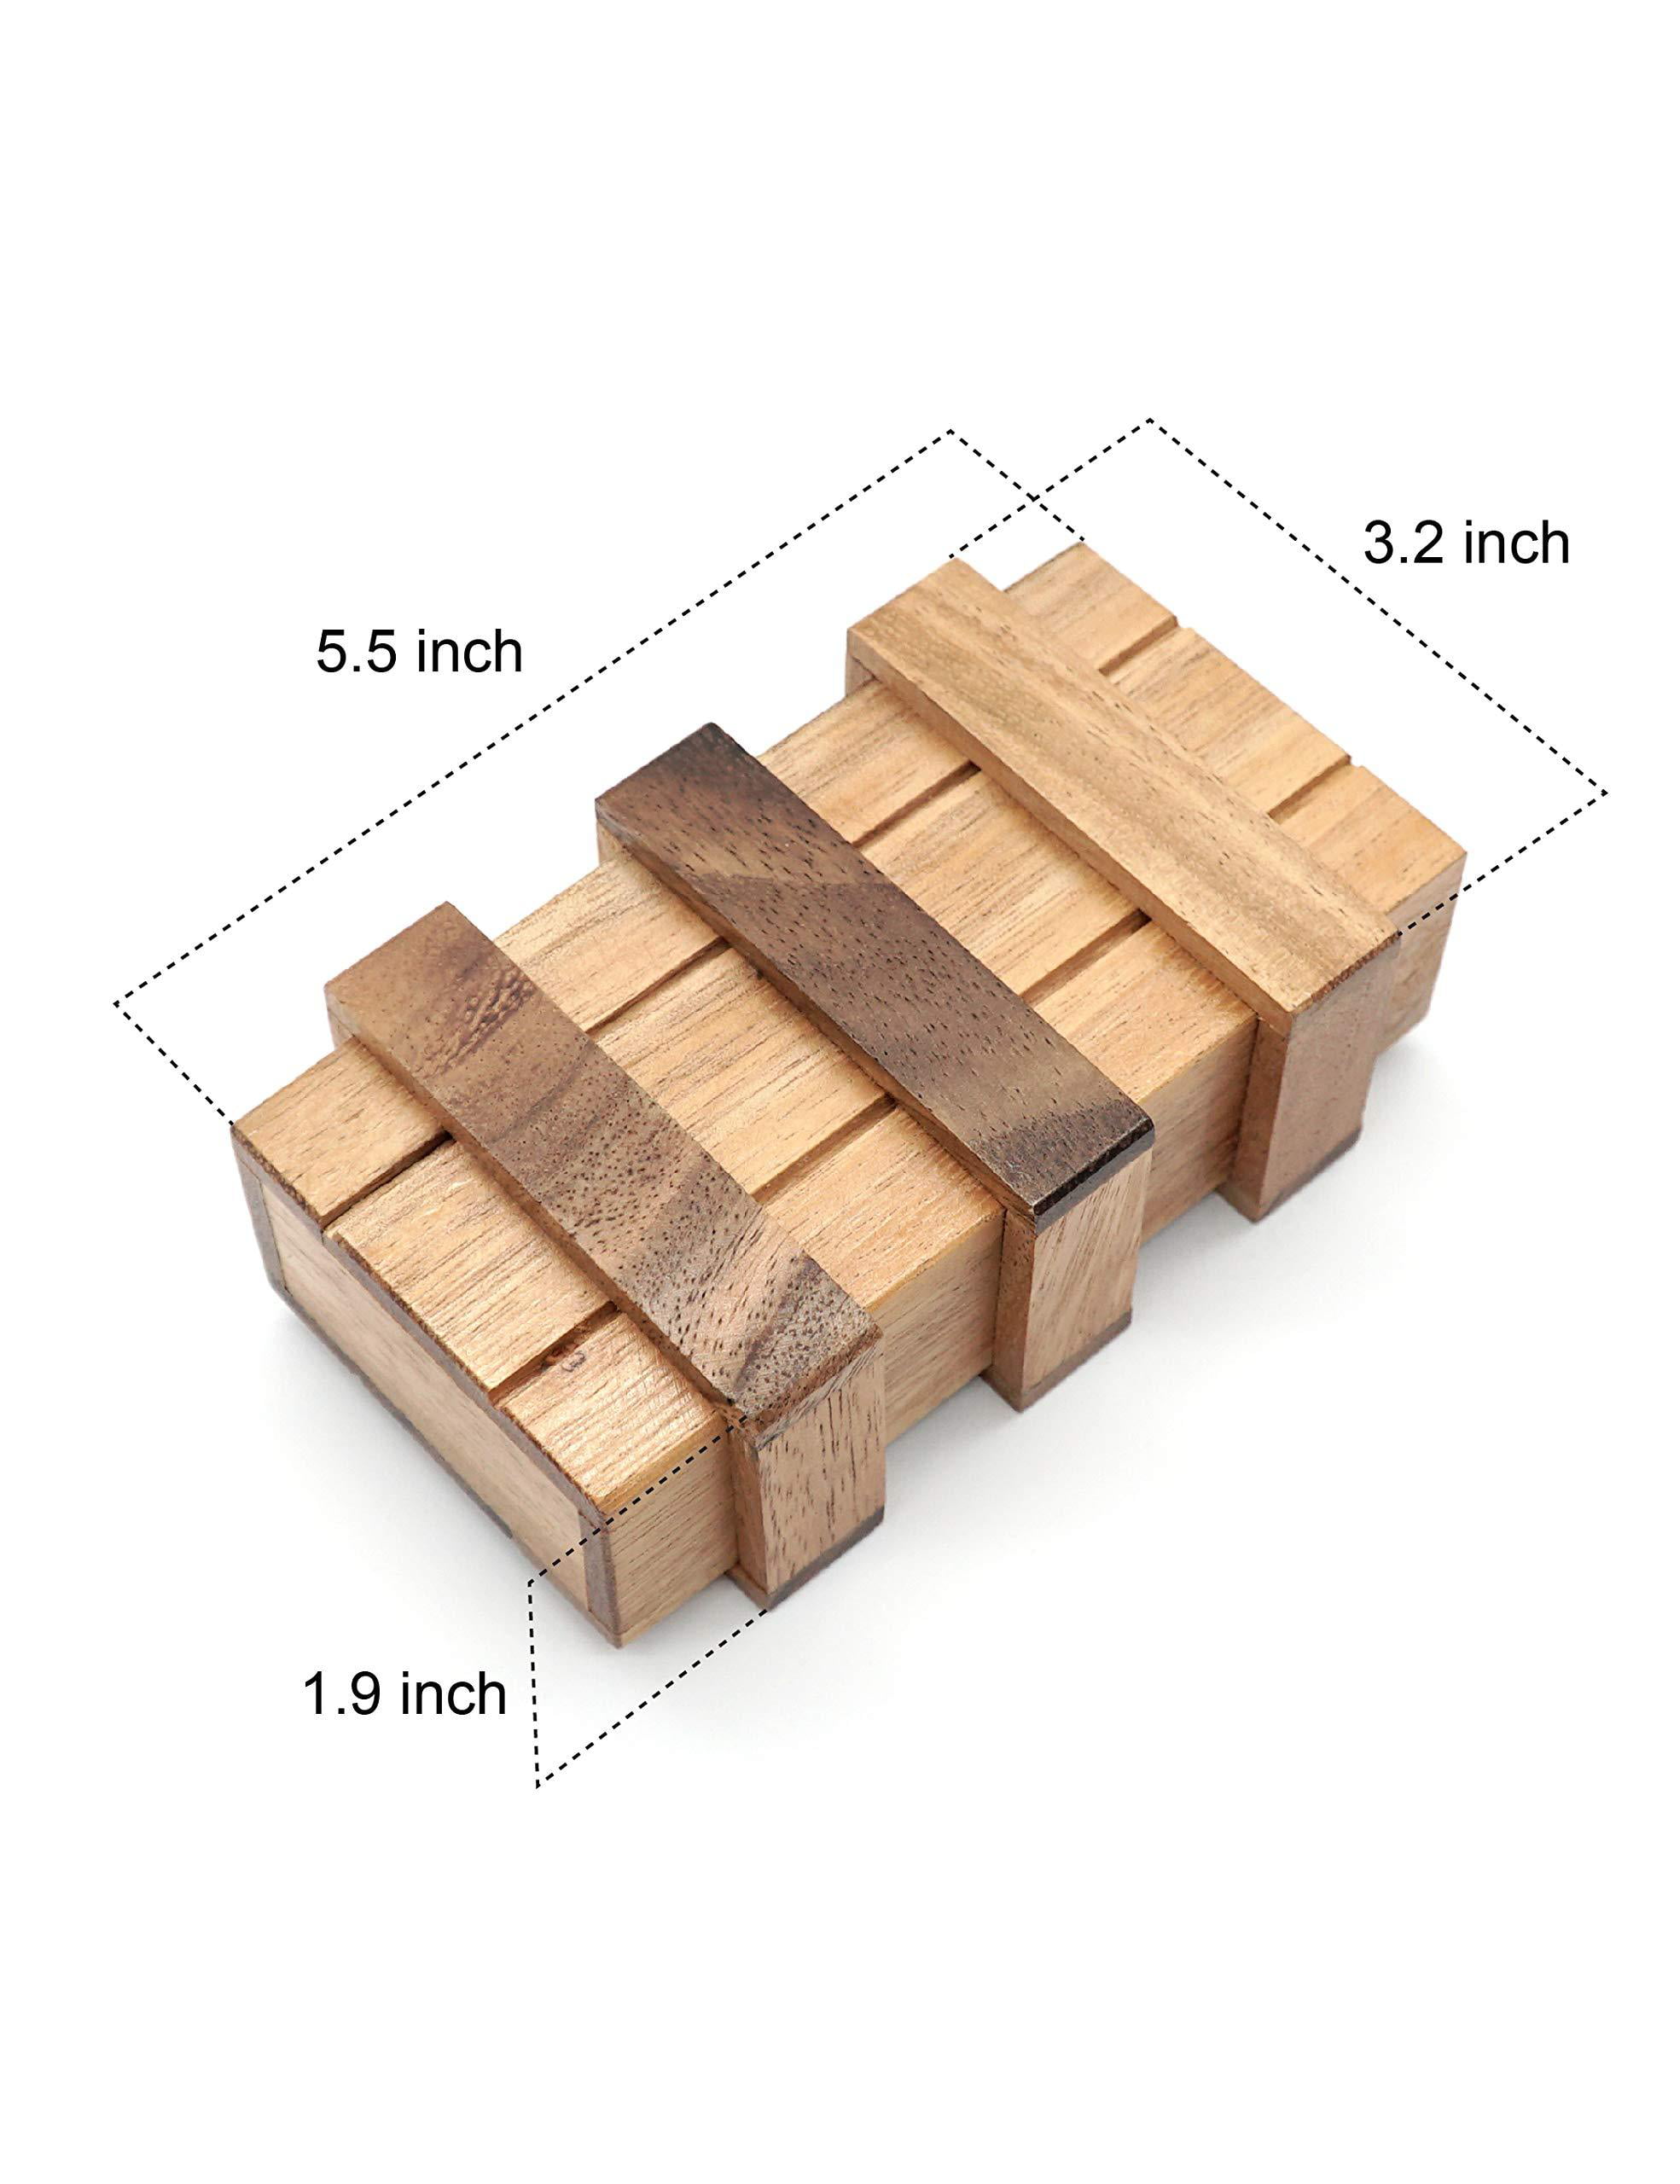 wooden mini puzzles great value for money!!! 